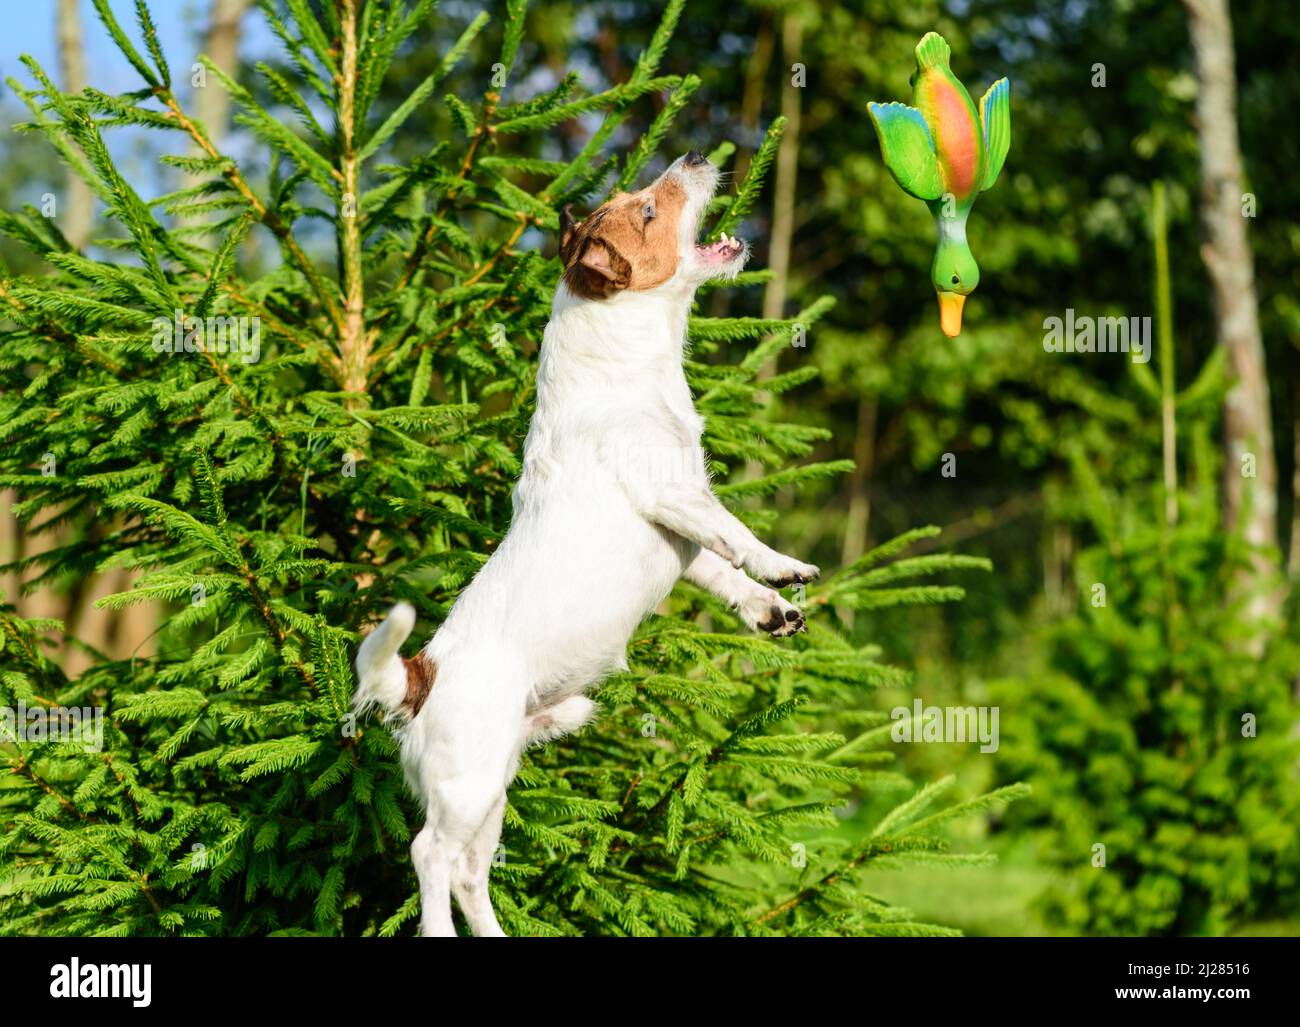 Dog jumping to catch flying toy duck Stock Photo